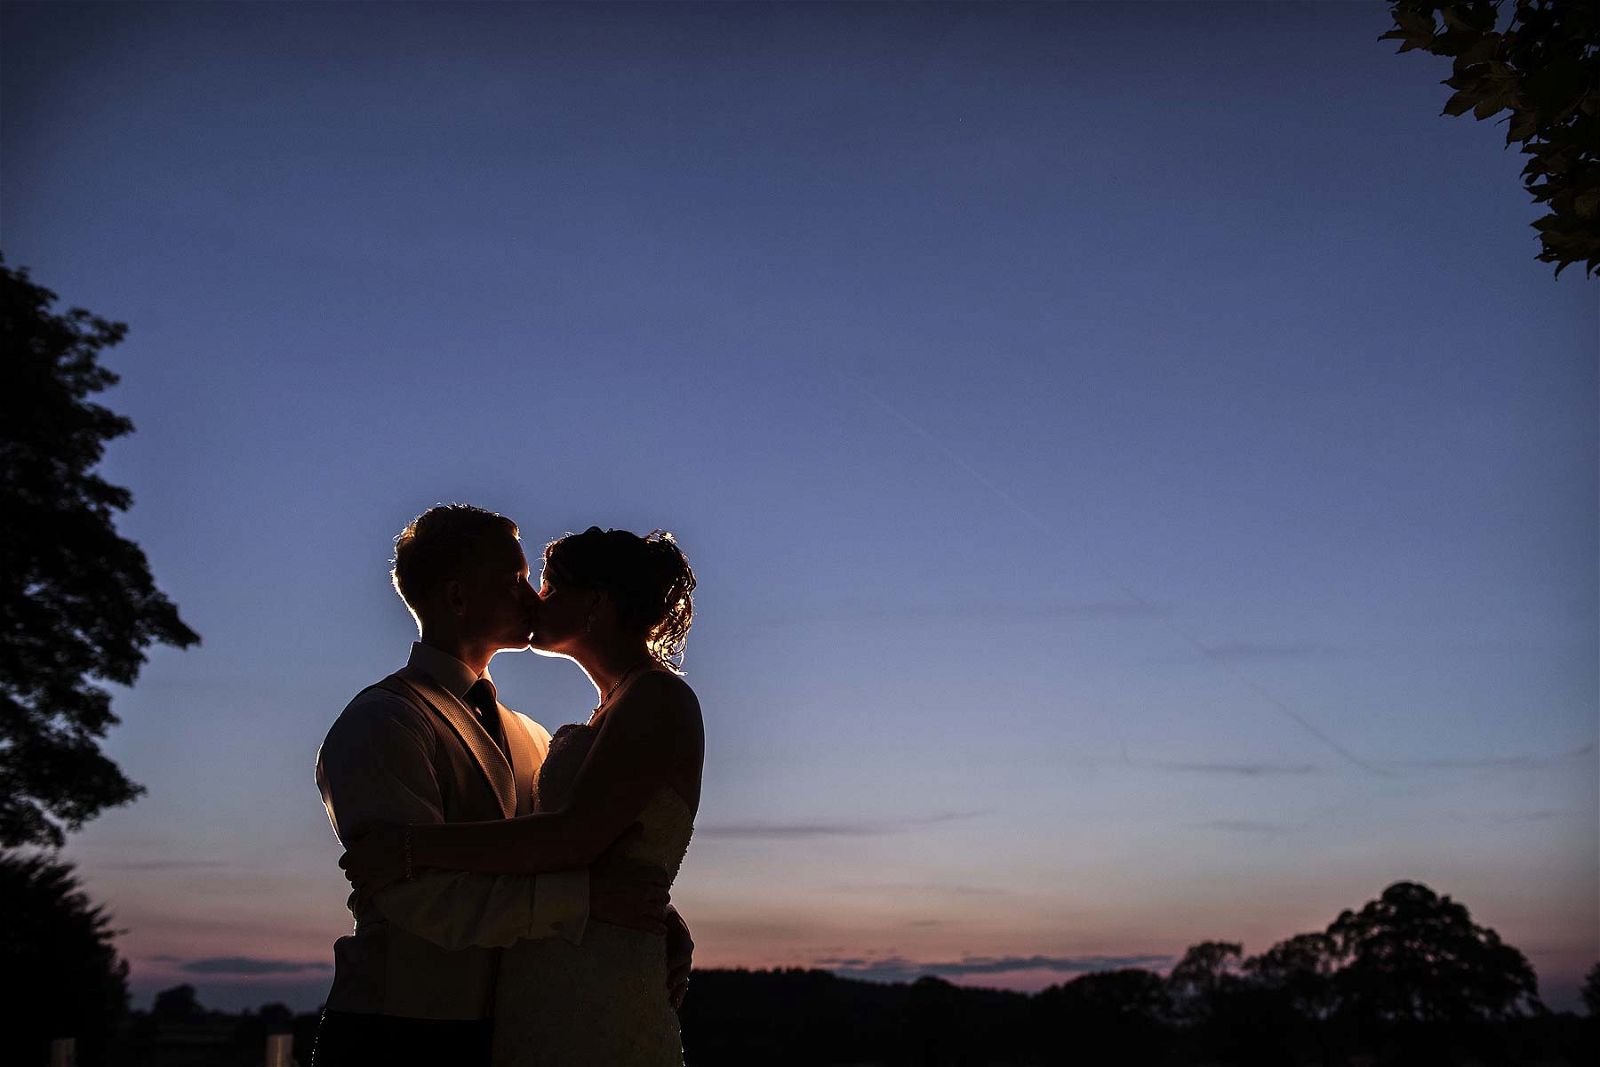 Stunning evening portrait at Somerford Hall in Brewood by Somerford Hall Wedding Photographers Stuart James